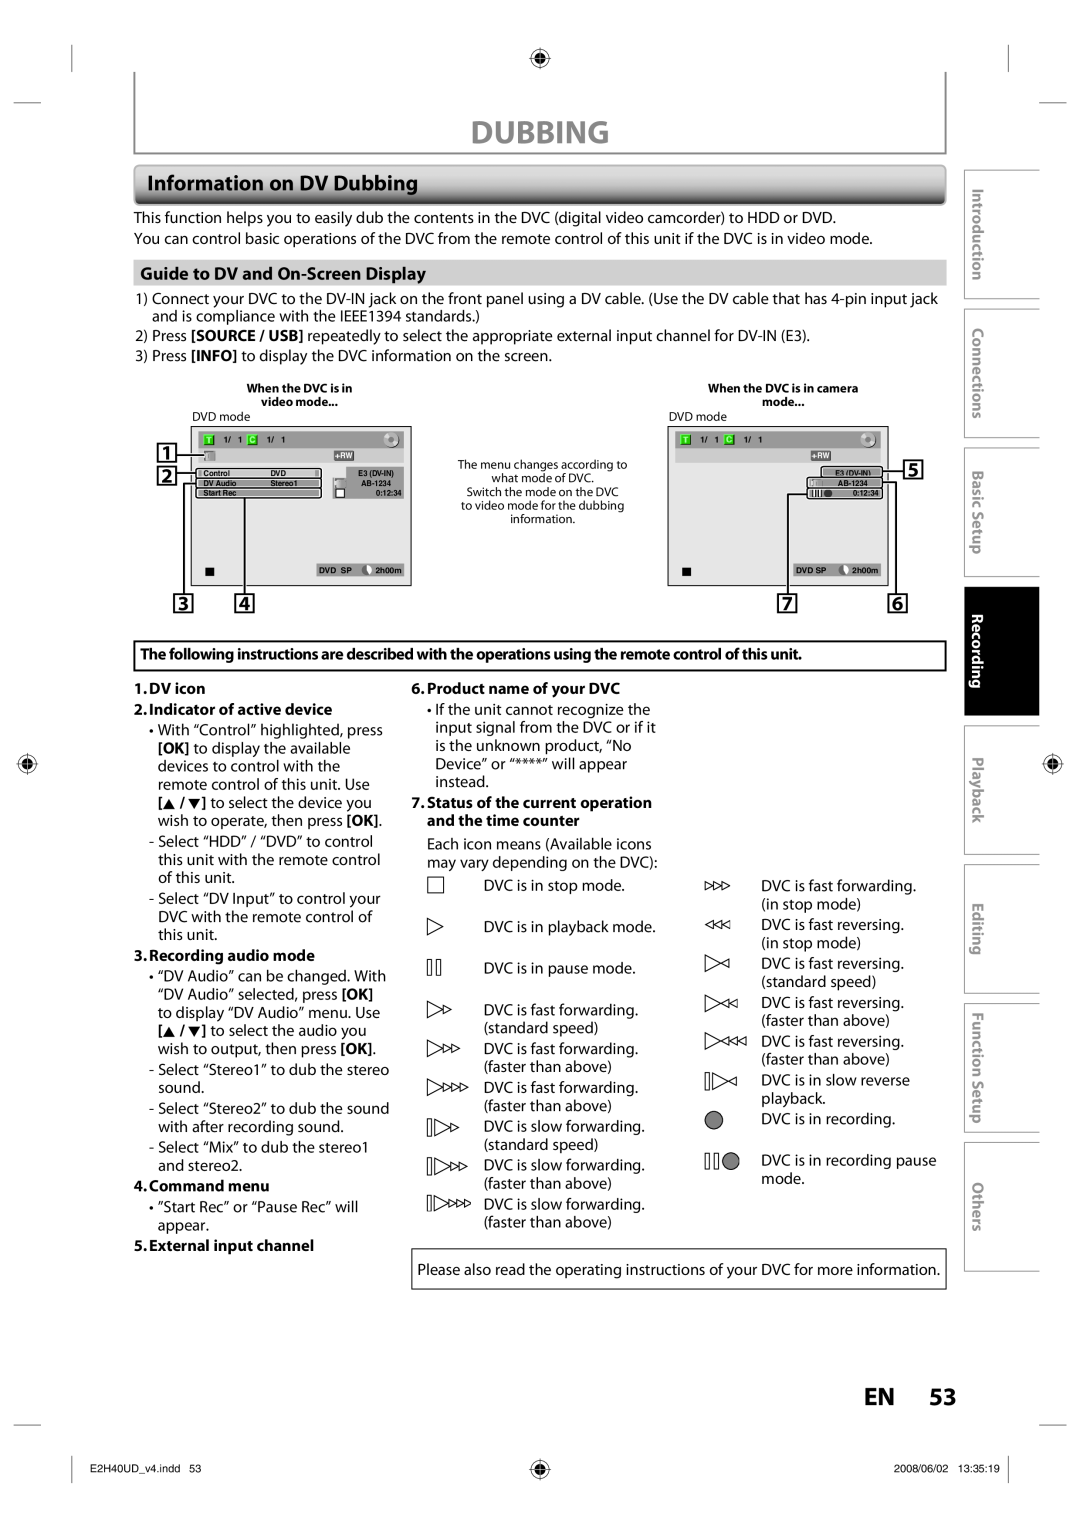 Philips DVDR3575H/37 Information on DV Dubbing, Guide to DV and On-Screen Display, Introduction Connections, Basic Setup 